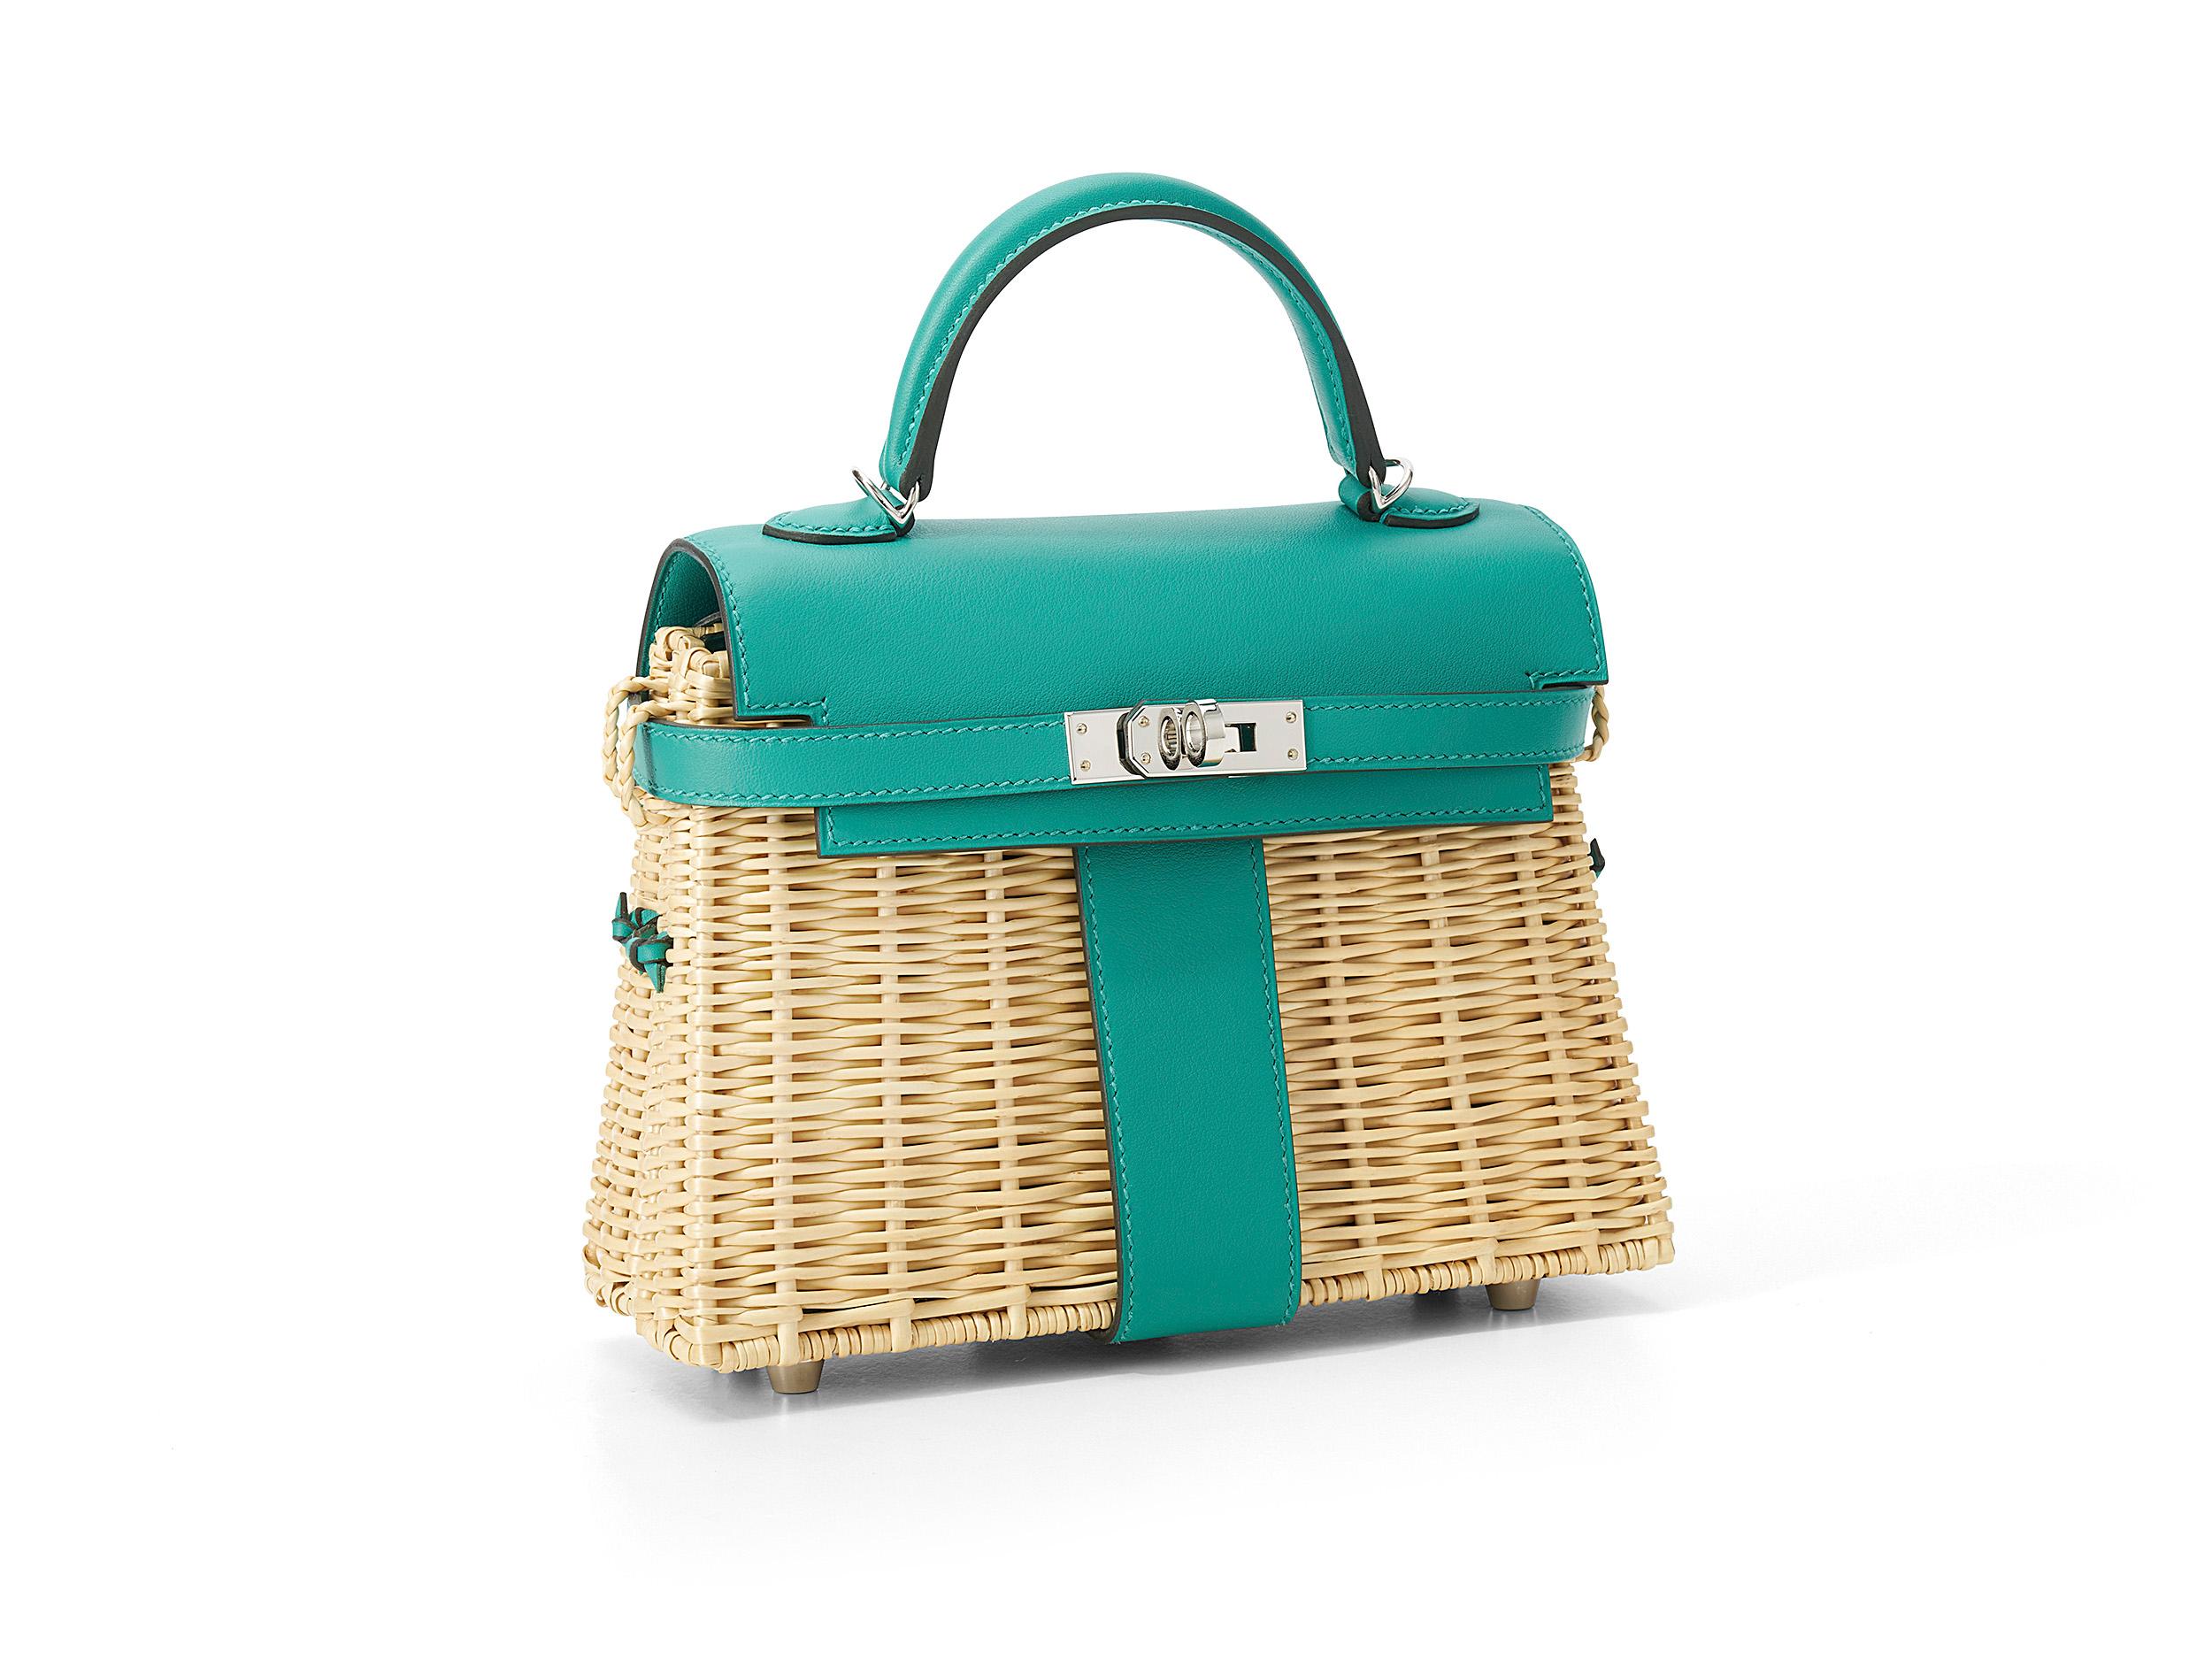 Hermès Kelly Picnic in vert verone and osier wicker/swift leather with palladium hardware. The bag is in excellent and unworn condition with minimal scratches on the hardware. Comes as full set including the original receipt. 
Stamp Y (2020) 

